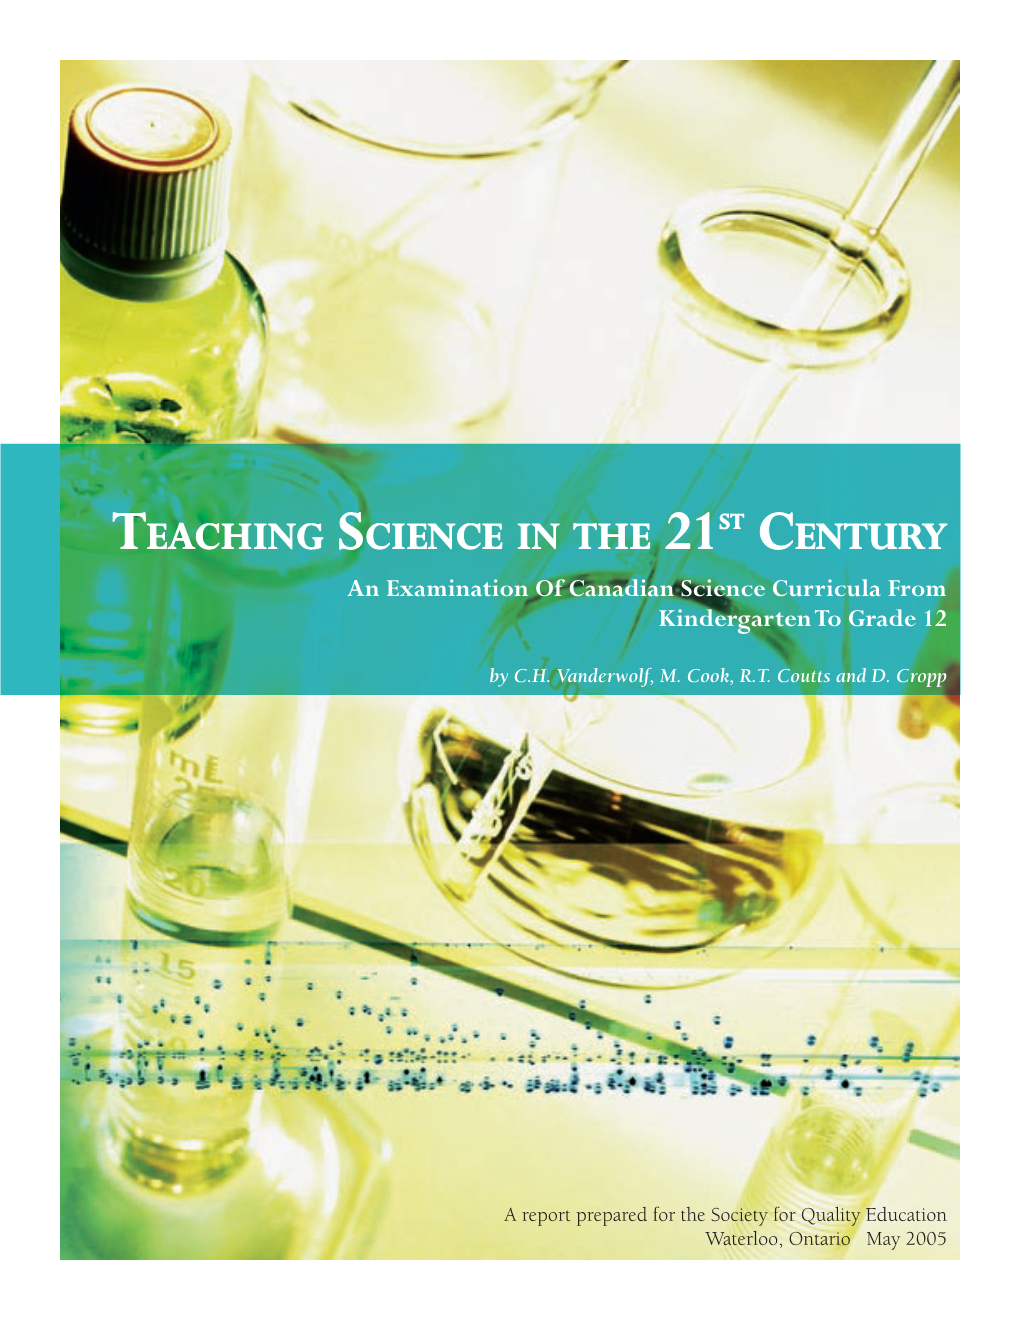 TEACHING SCIENCE in the 21ST CENTURY an Examination of Canadian Science Curricula from Kindergarten to Grade 12